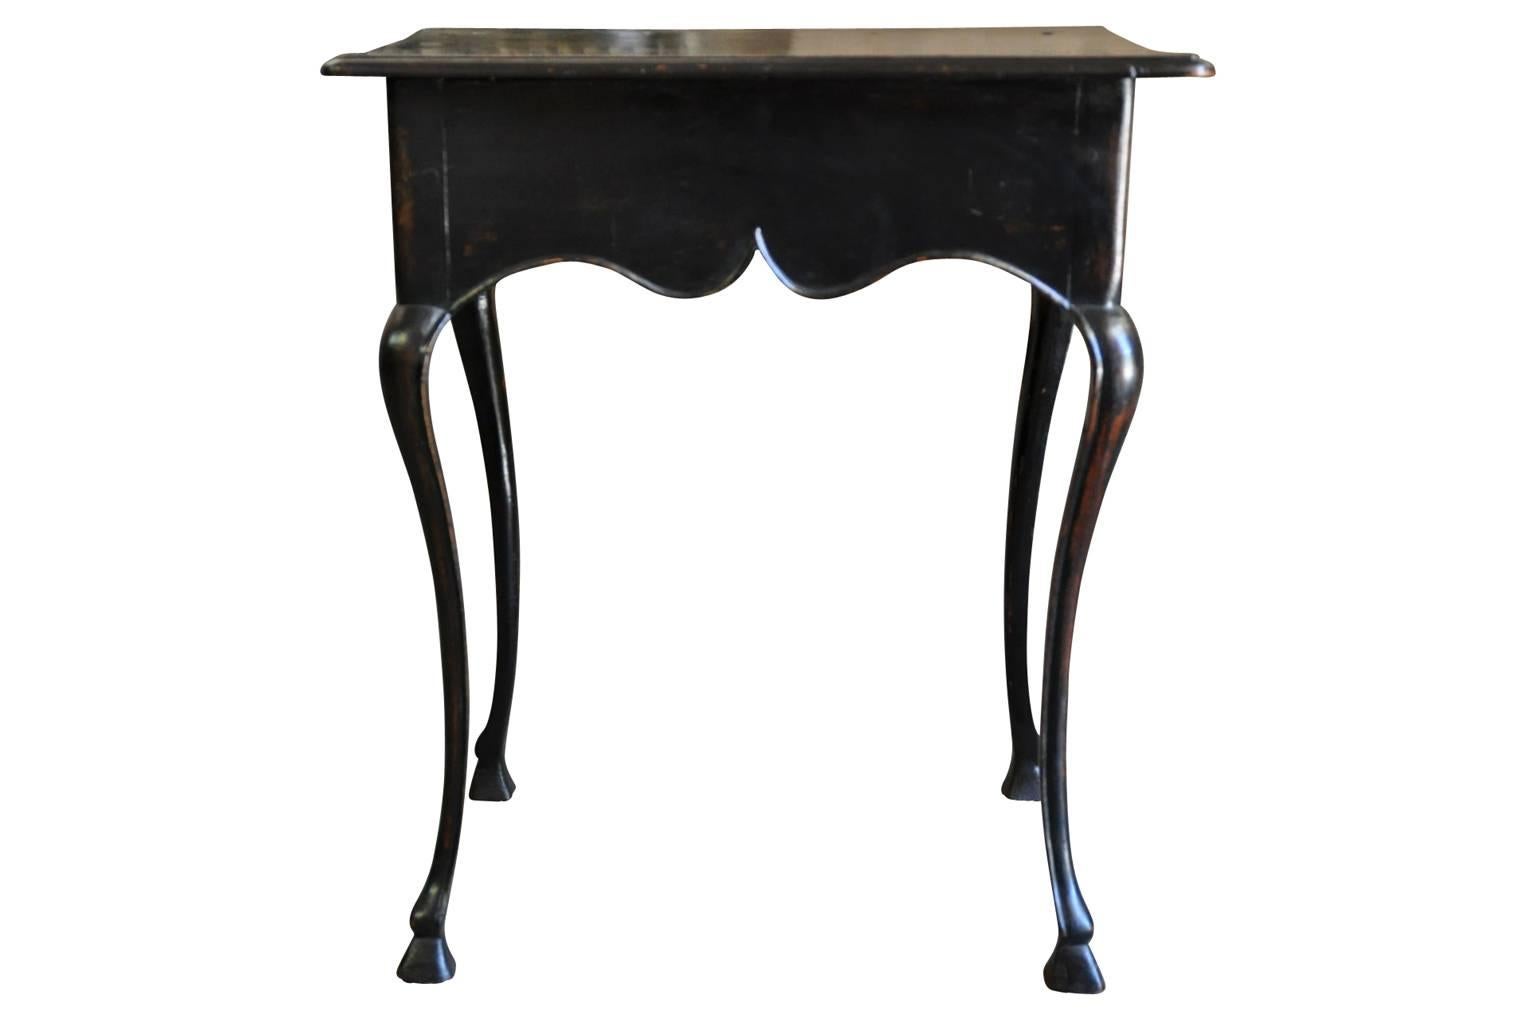 19th Century French Louis XV Side Table